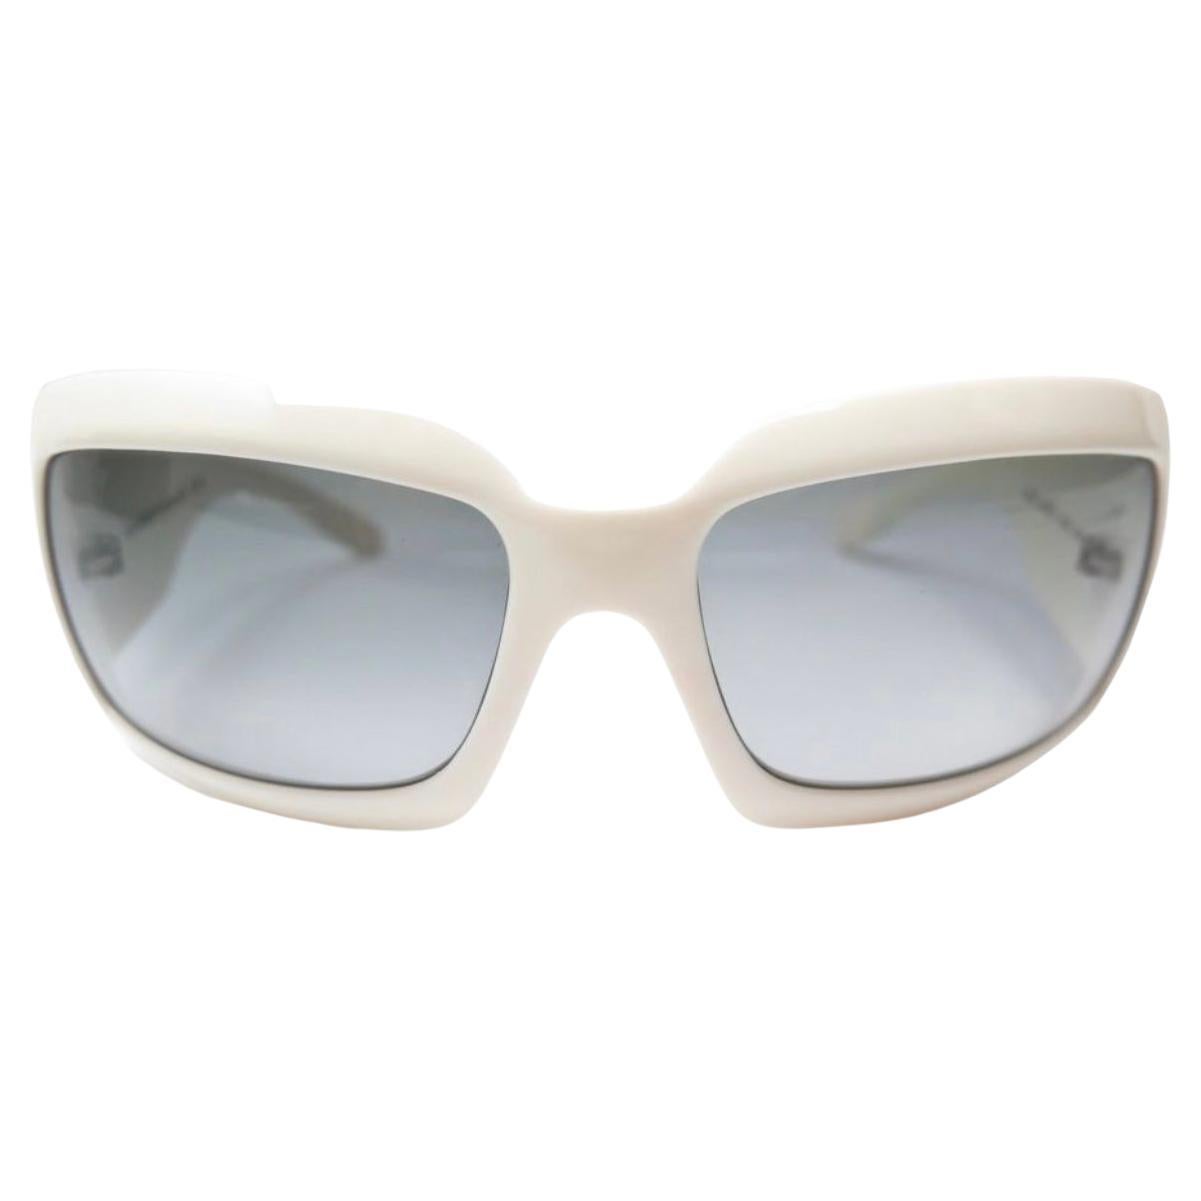 Chanel 6022-Q c 716/11 61 16 120 White Women Sunglasses, Made in Italy CC logo Pre Loved
Chanel double CC logo on the side
White Women Sunglasses, Medium size
Brand name : CHANEL
Model : LOGO CC
Manufacturer number : 6022-Q
Sex : Woman
Retail price